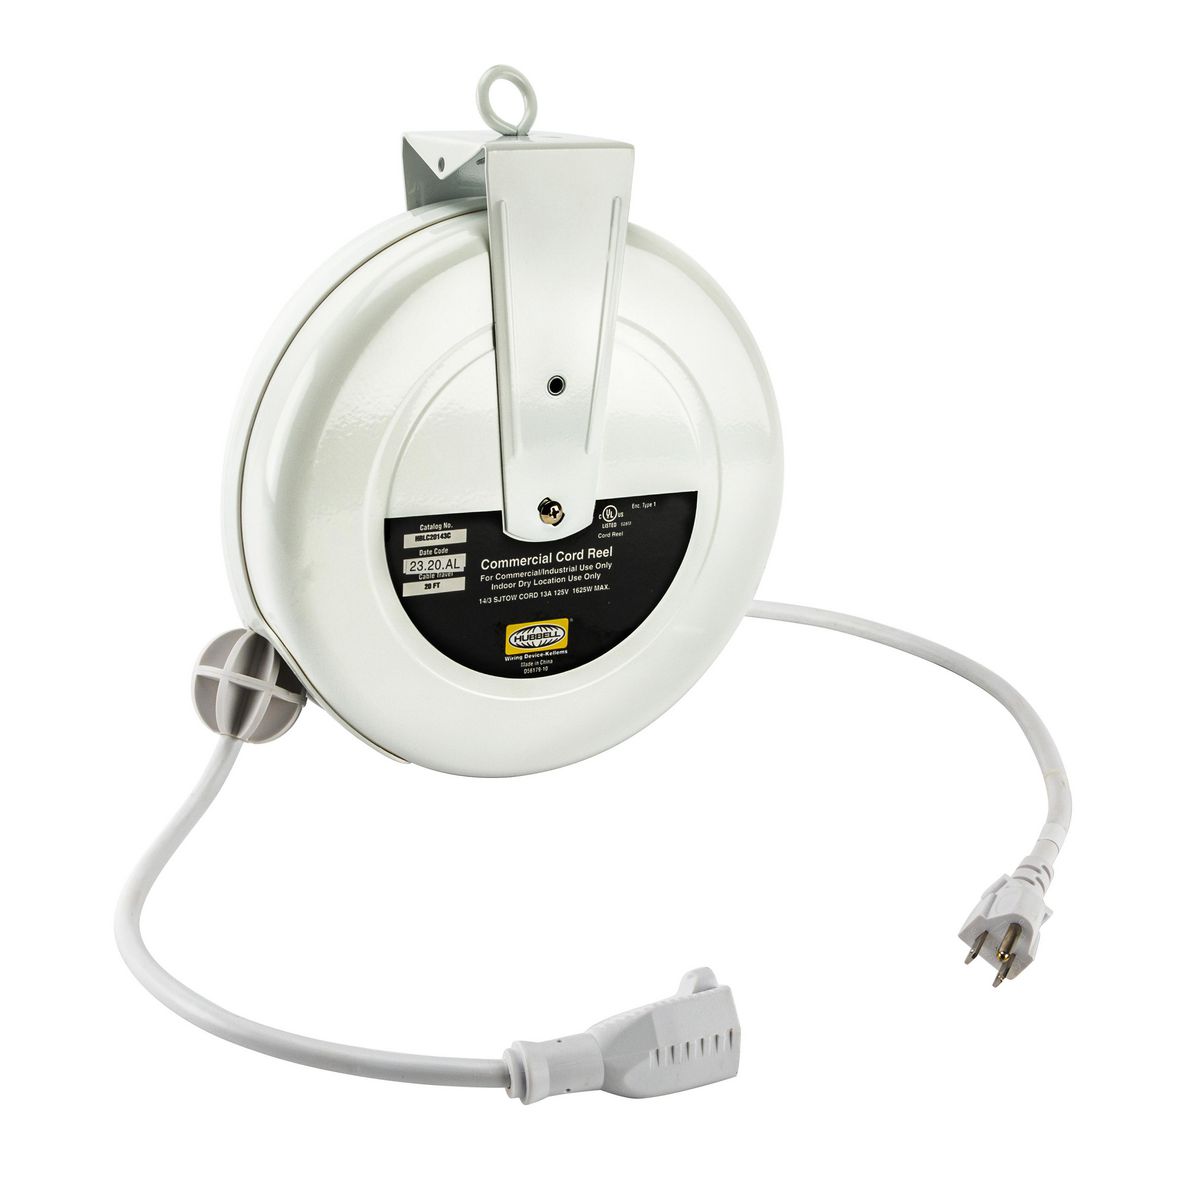 White commercial cord reel with single outlet, HBLC20143C